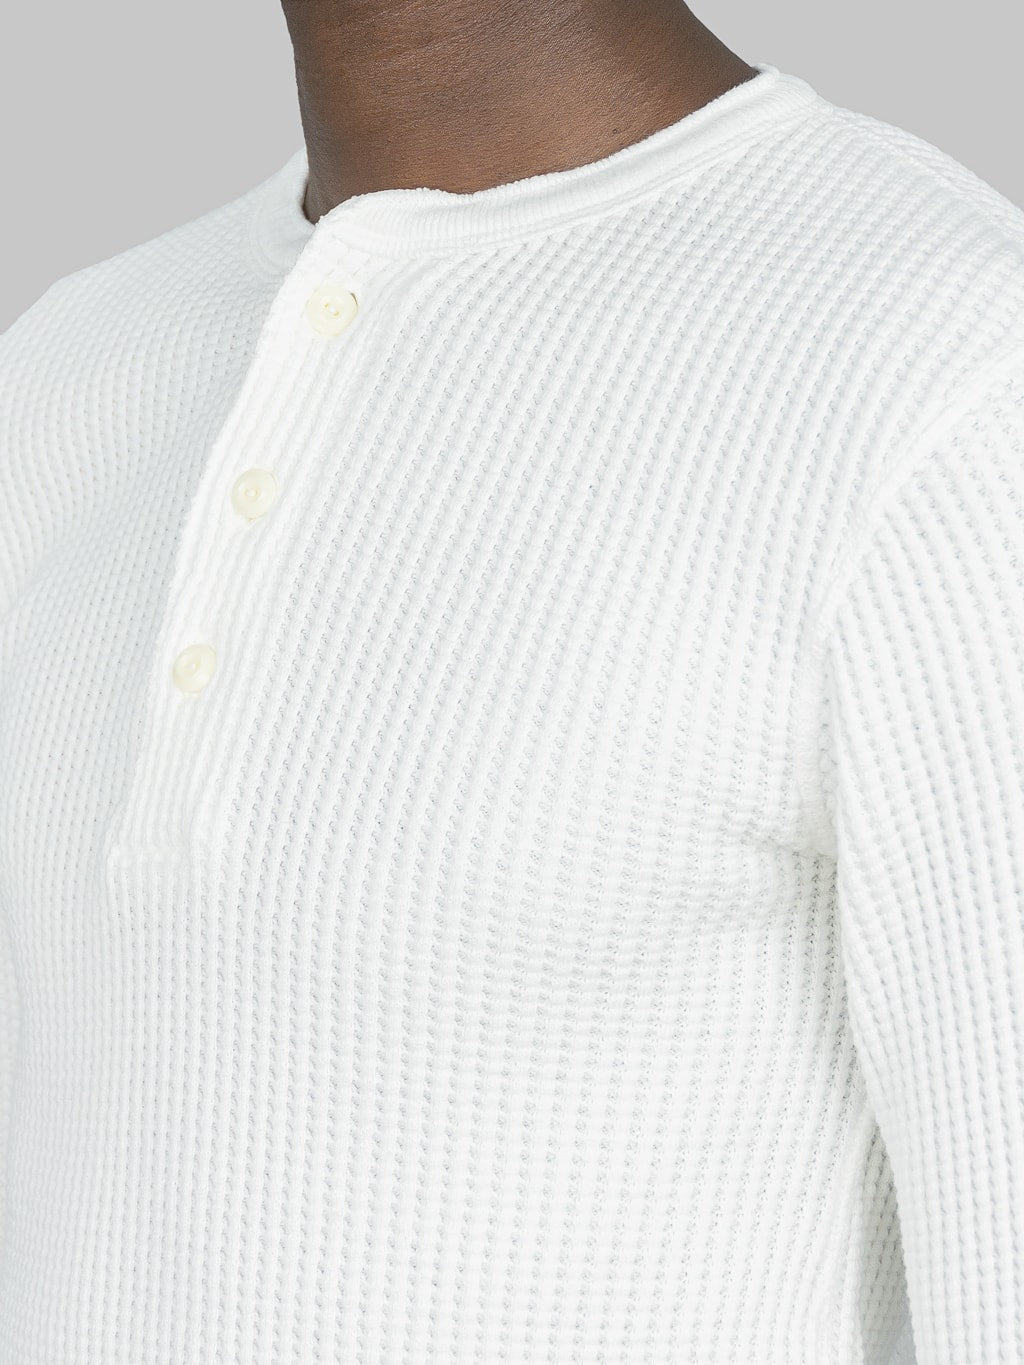 UES Thermal Big Waffle Henley TShirt Off White  three button placket